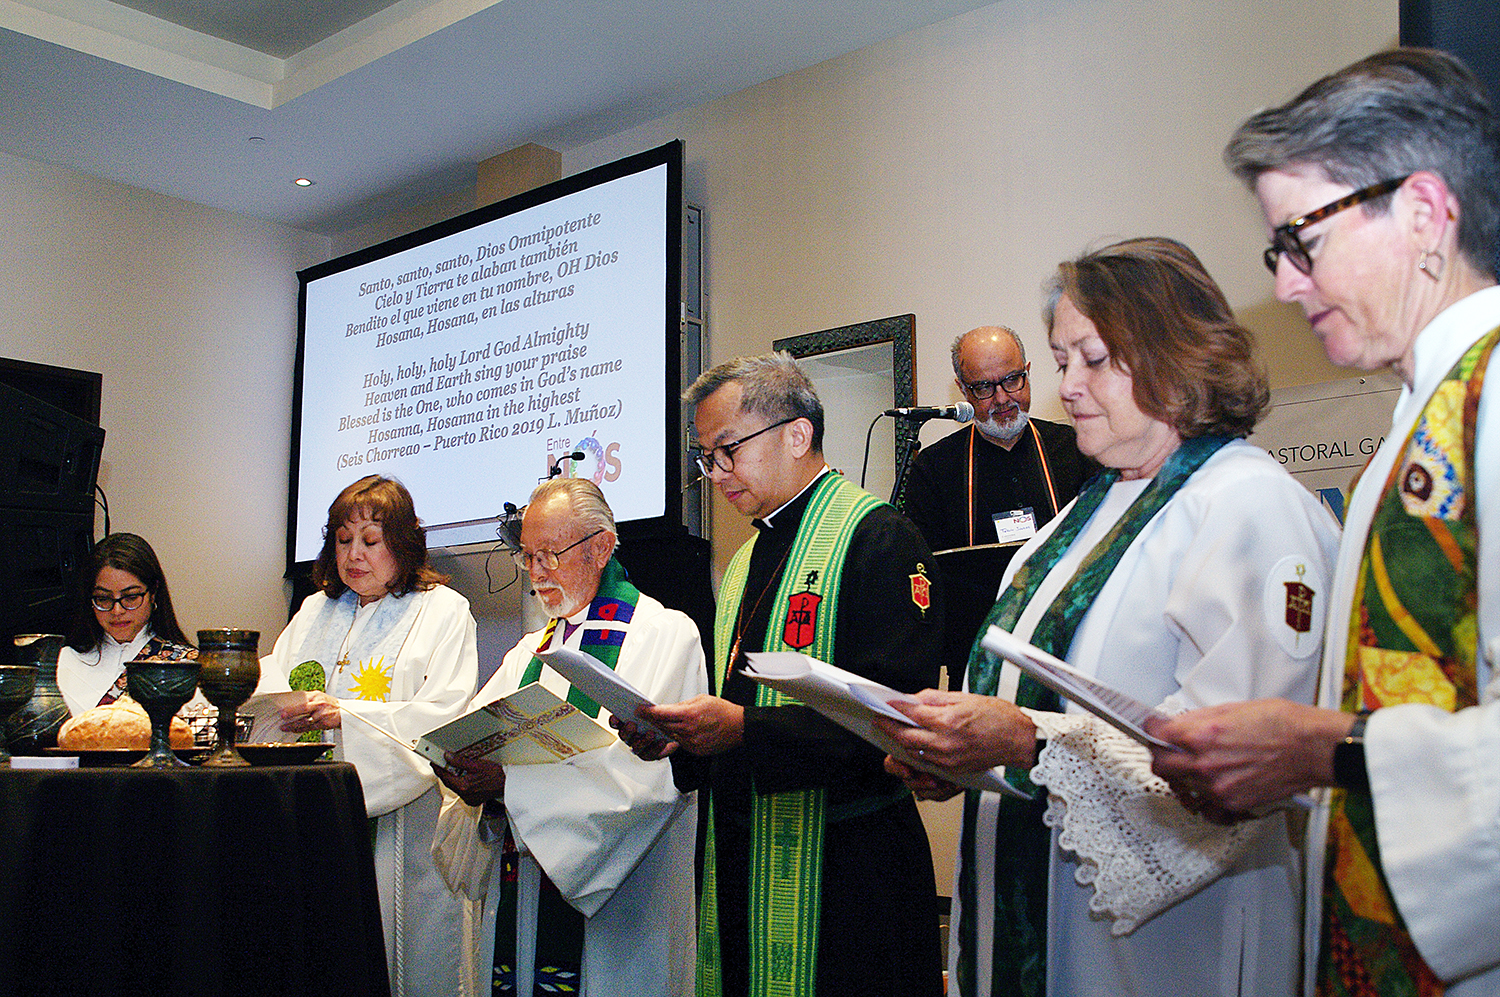 Members of the episcopacy of The United Methodist Church presided over the ceremony of the sacrament of Holy Communion during worship at Entre Nos. From left to right: Deaconess Patricia Bonilla, Northern Illinois Conference; Bishop Minerva Carcaño, California-Nevada Conference; Bishop Elías Galván, executive director of MARCHA; Bishop Carlo Rapanut, Desert Southwest Conference; Bishop Dottie Escobedo-Frank, California-Pacific Conference; and Bishop Sally Dyck, ecumenical officer of the Council of Bishops. Photo by the Rev. Gustavo Vasquez, UM News.